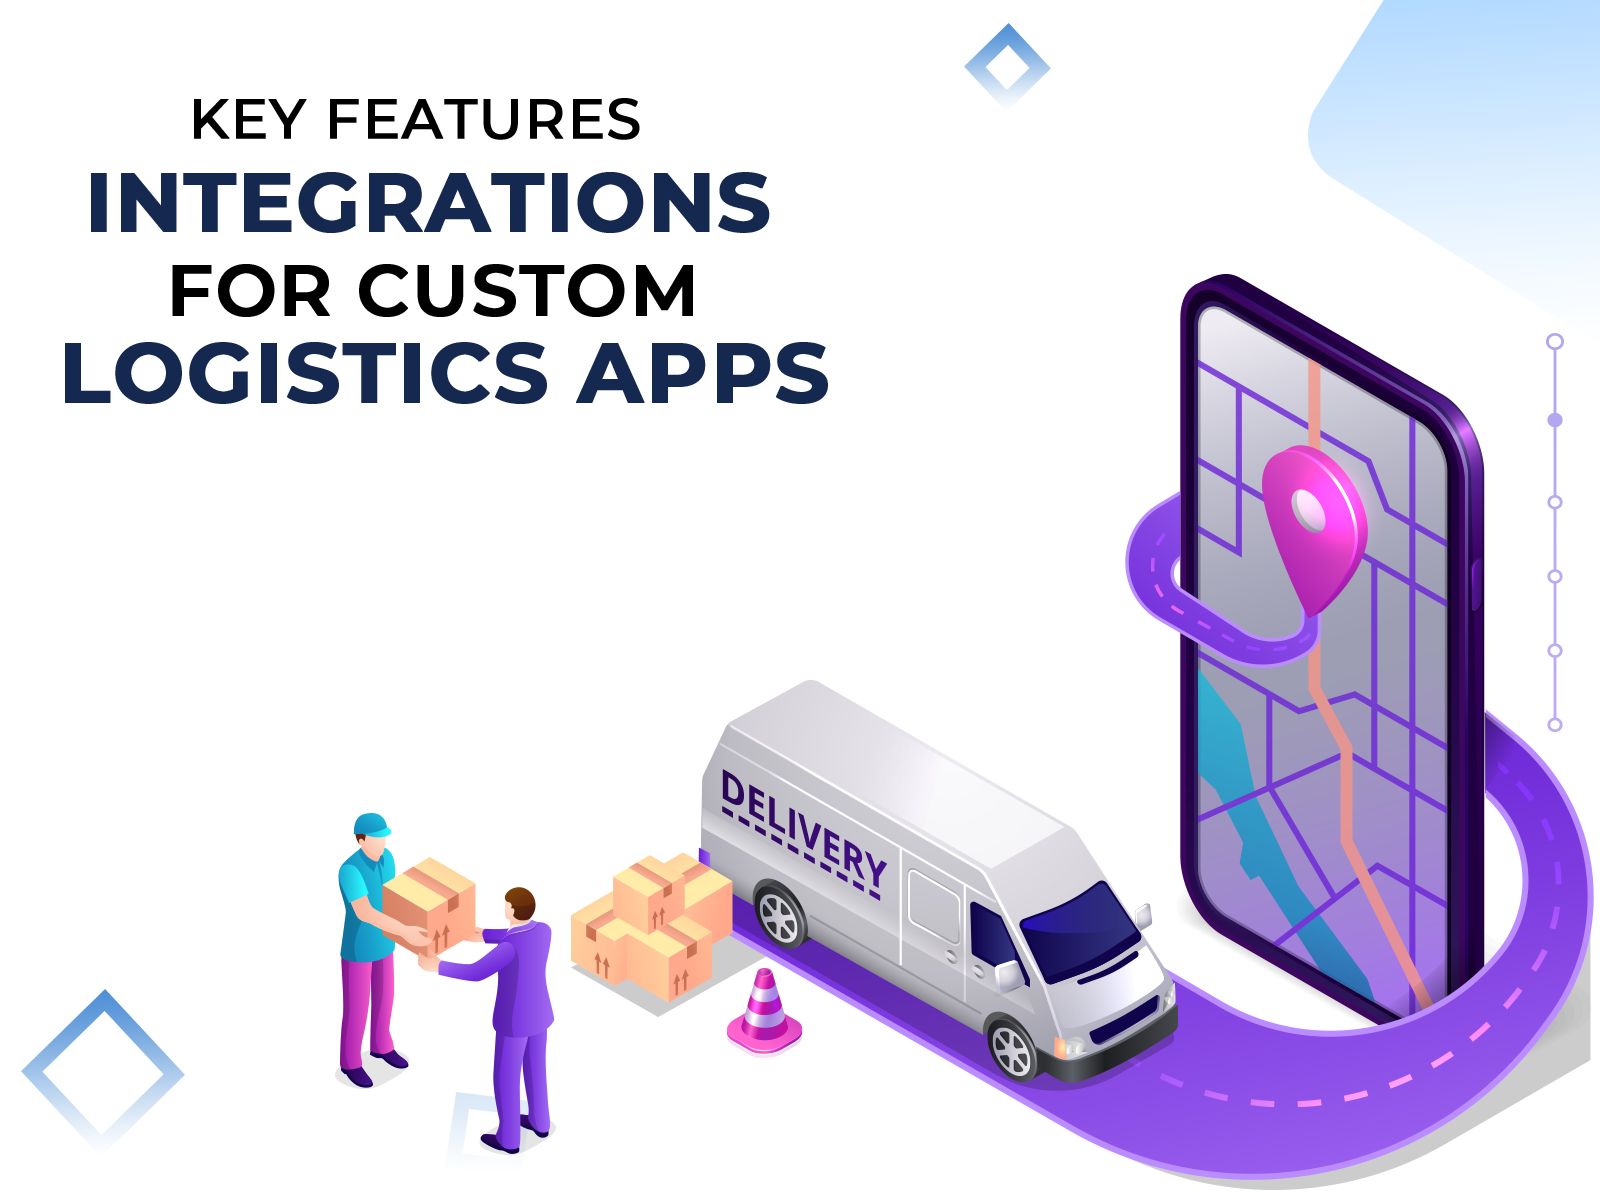 Key Features And Integrations For Custom Logistics Apps